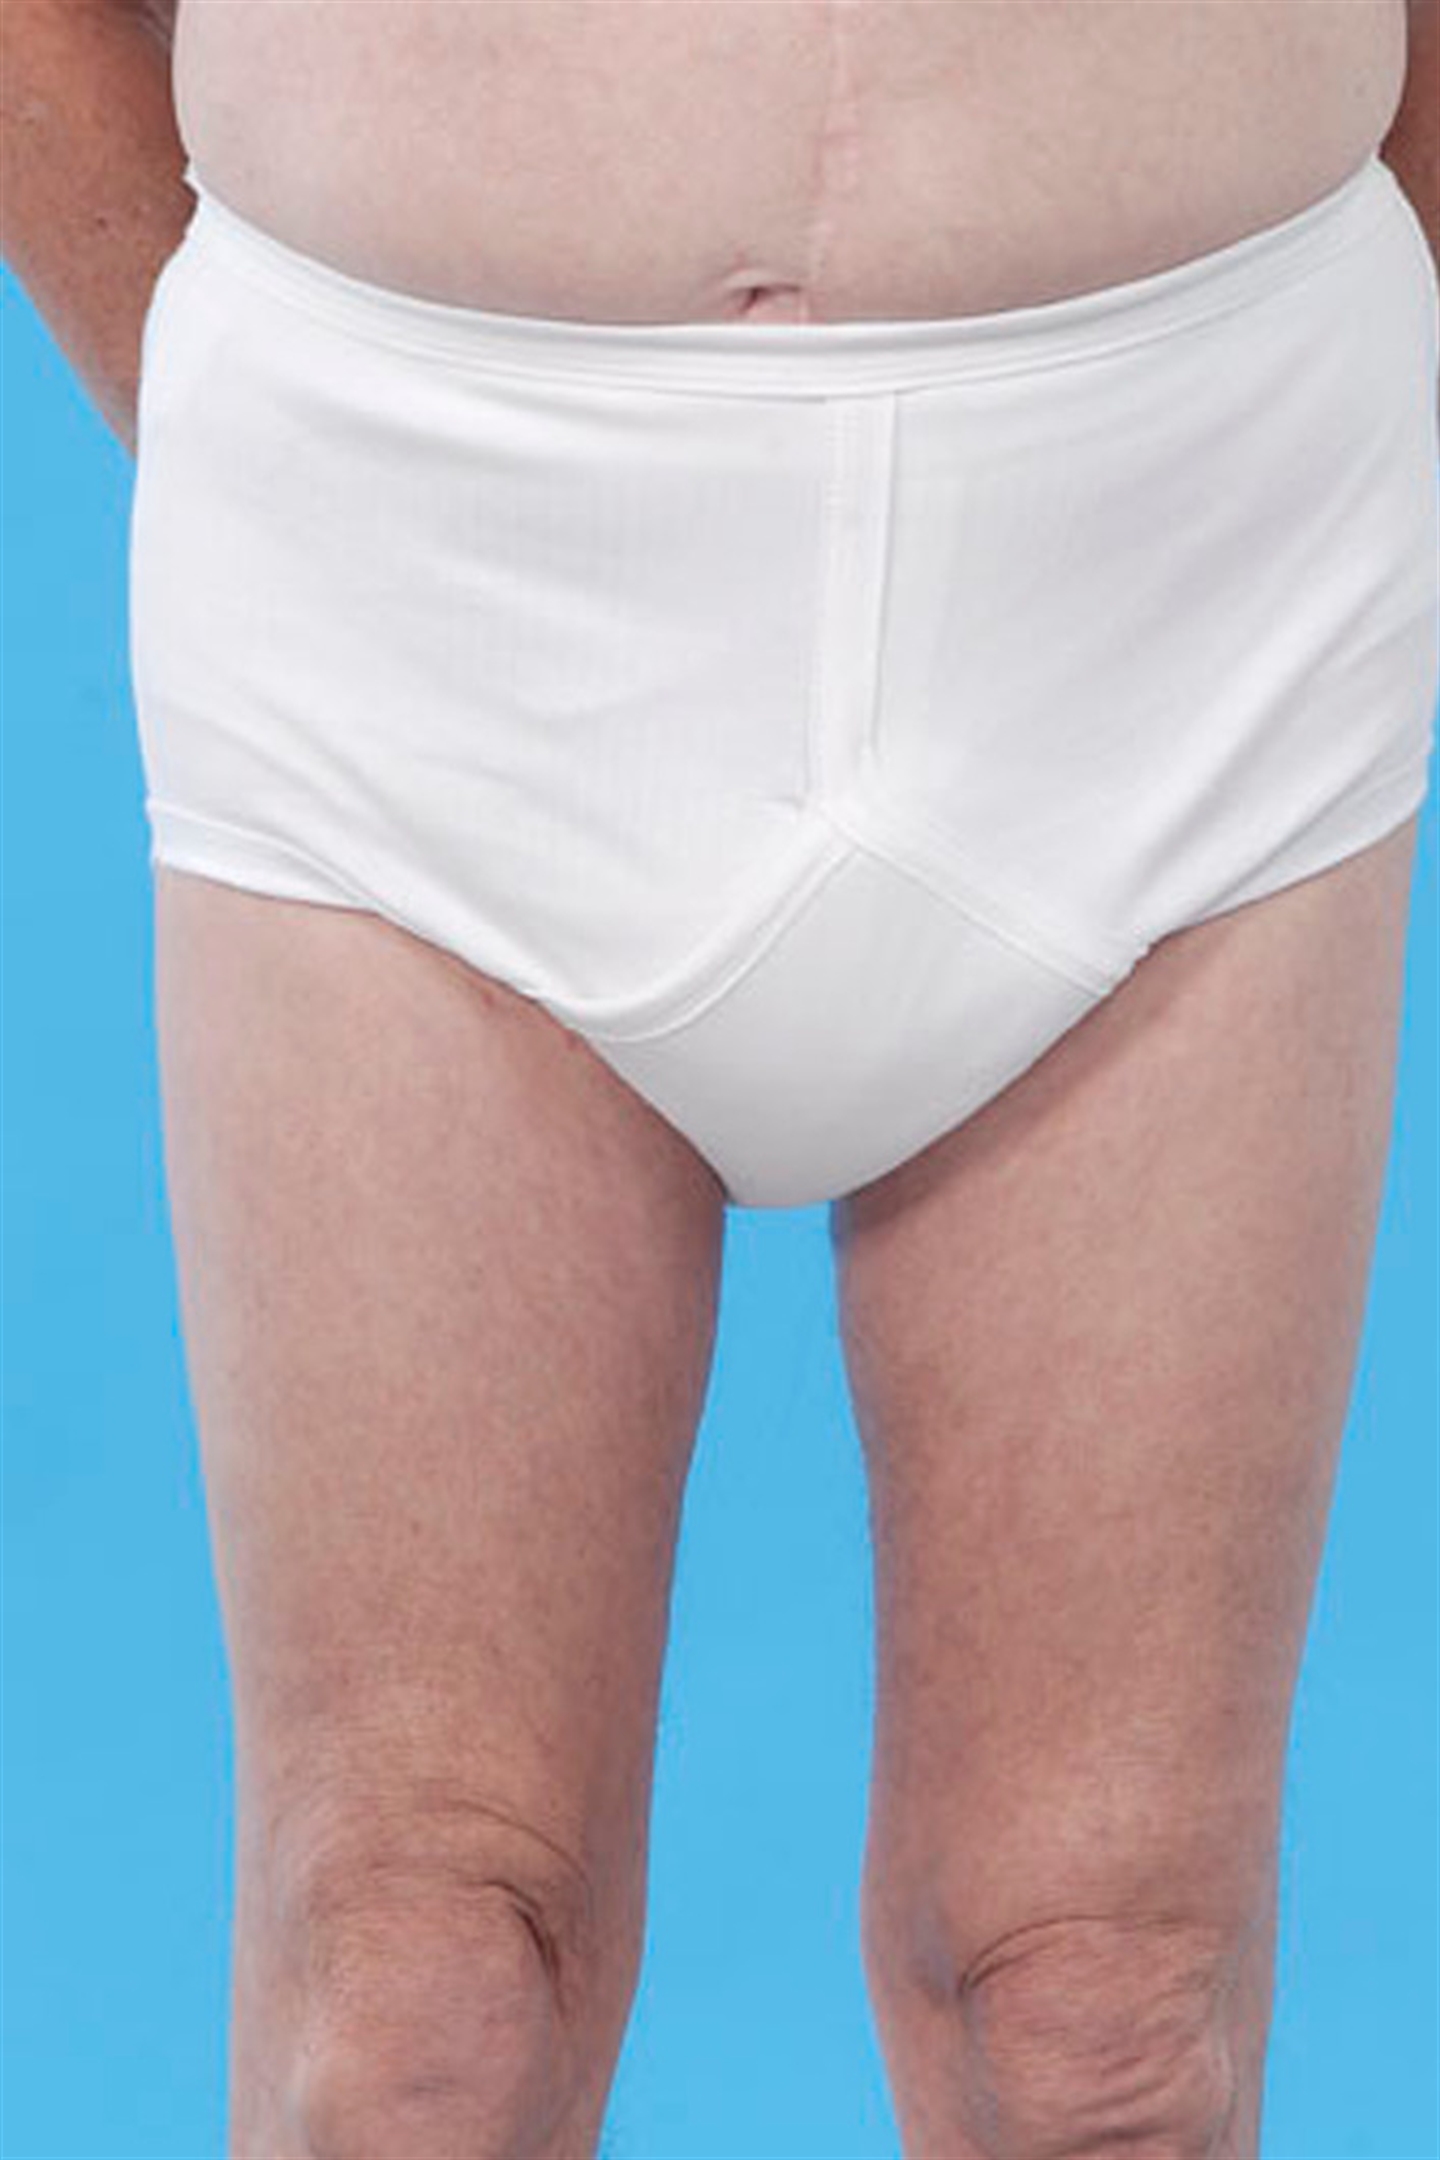 Washable pant with integral pad (pantegral) with fly opening